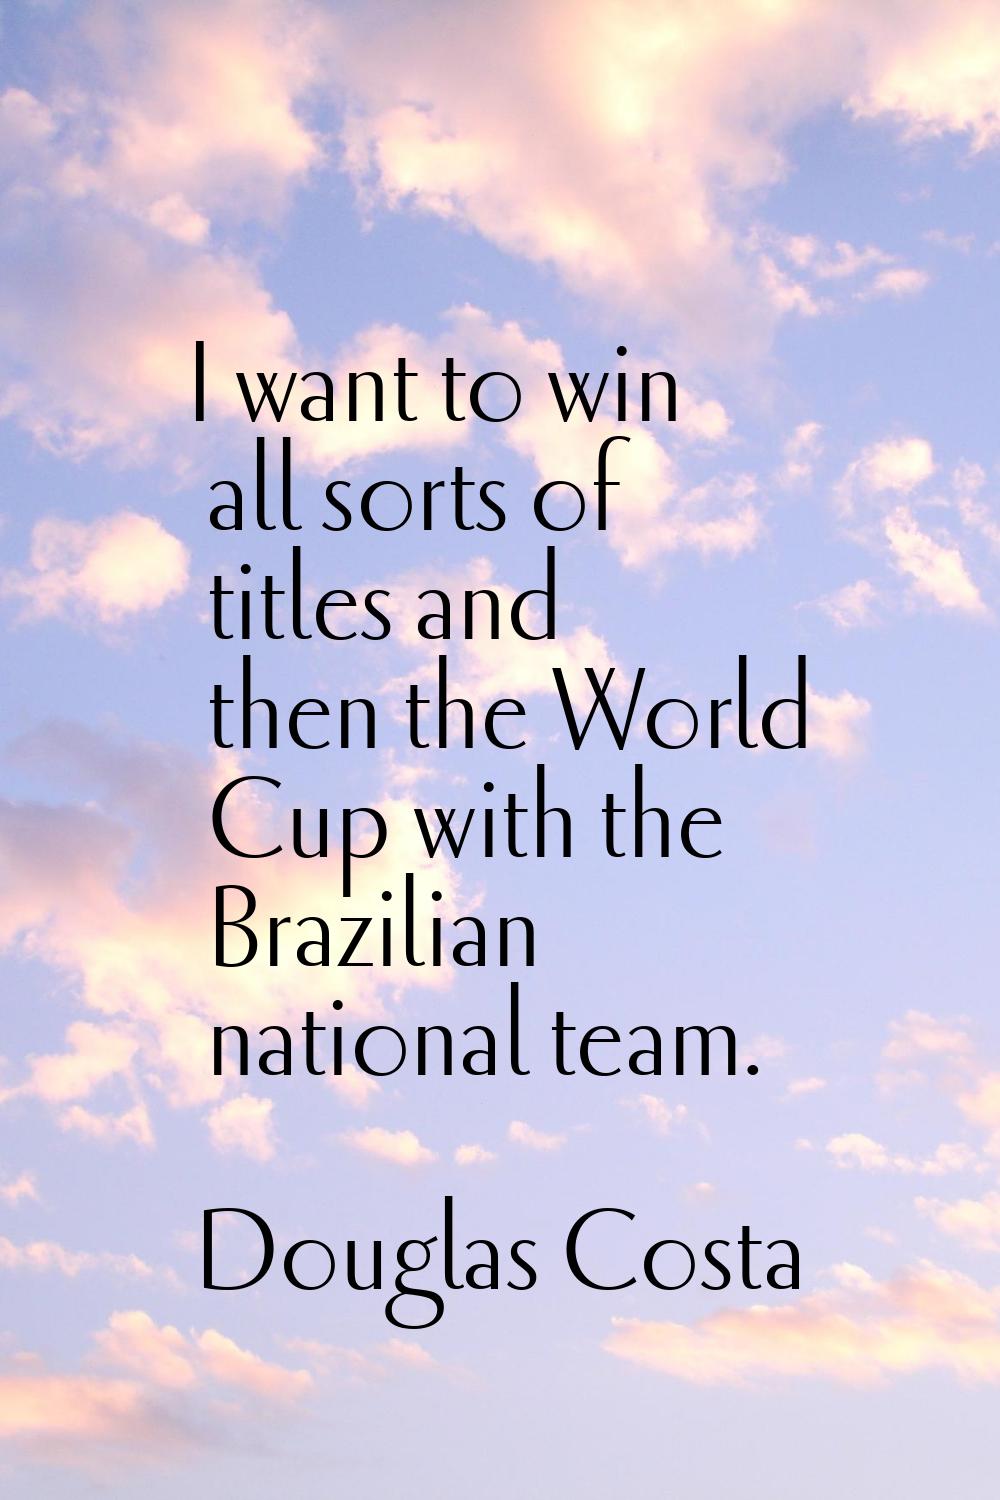 I want to win all sorts of titles and then the World Cup with the Brazilian national team.